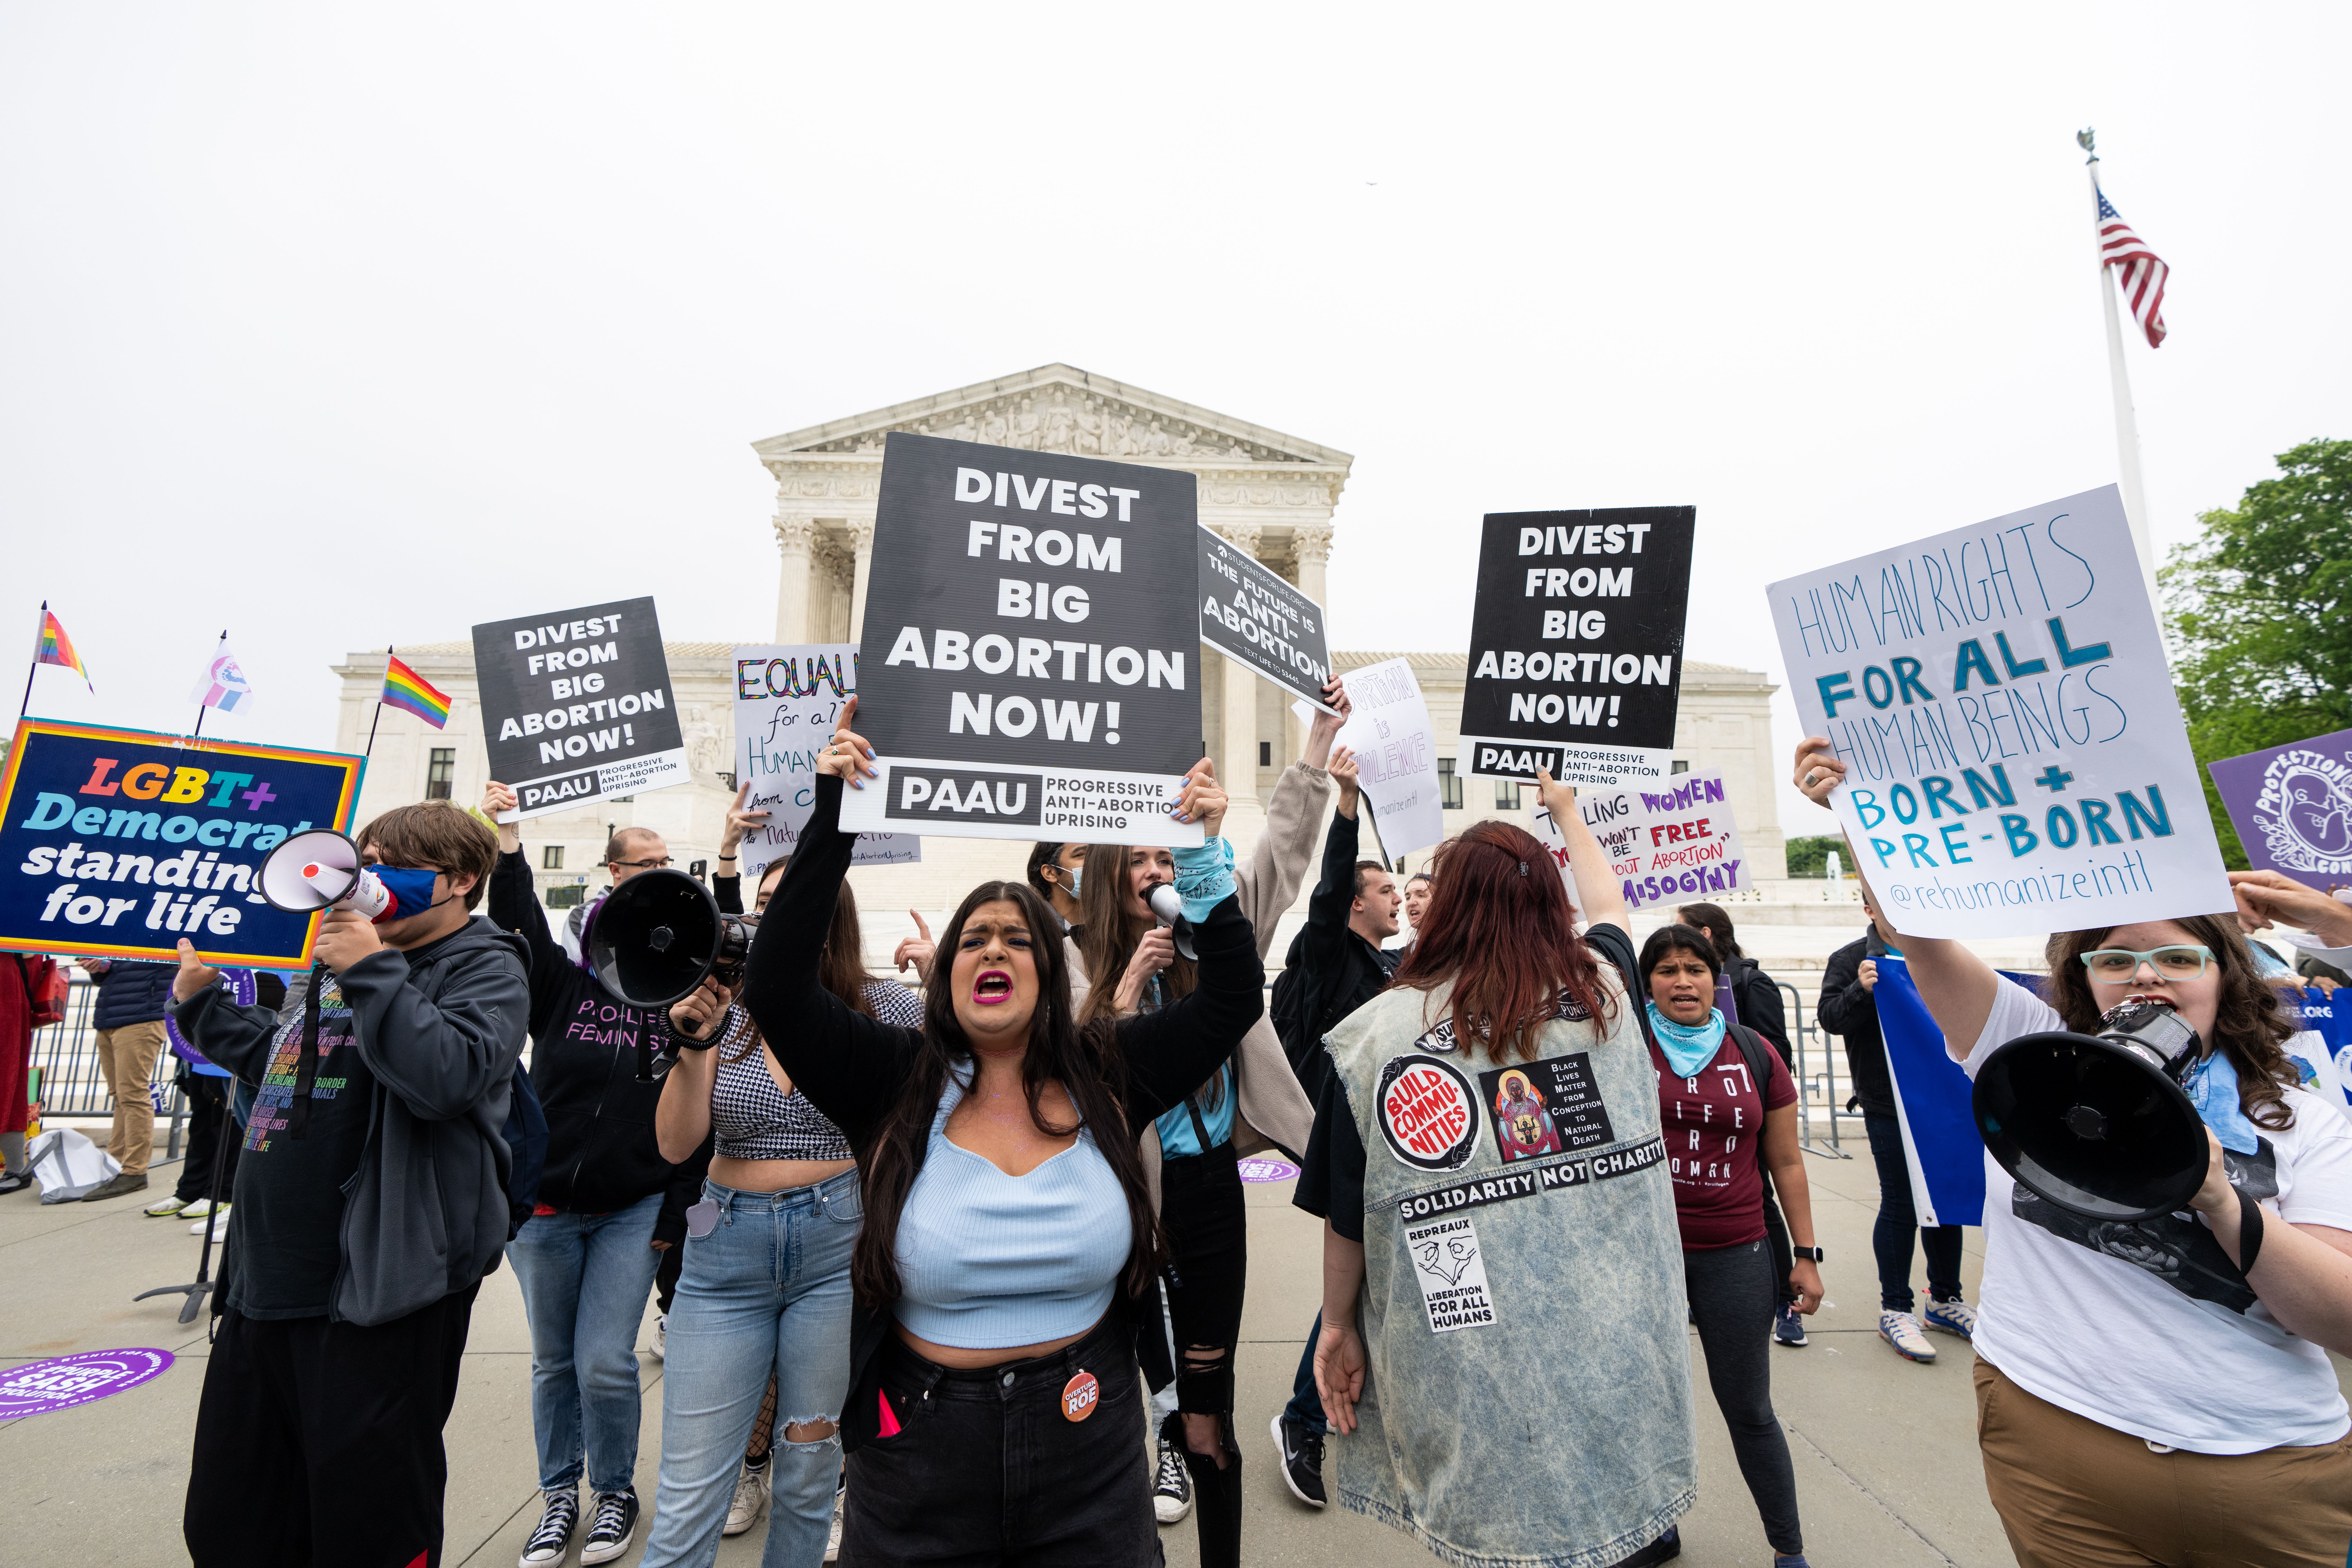 Pro-life activists rally in front of the U.S. Supreme Court on Tuesday, May 3.